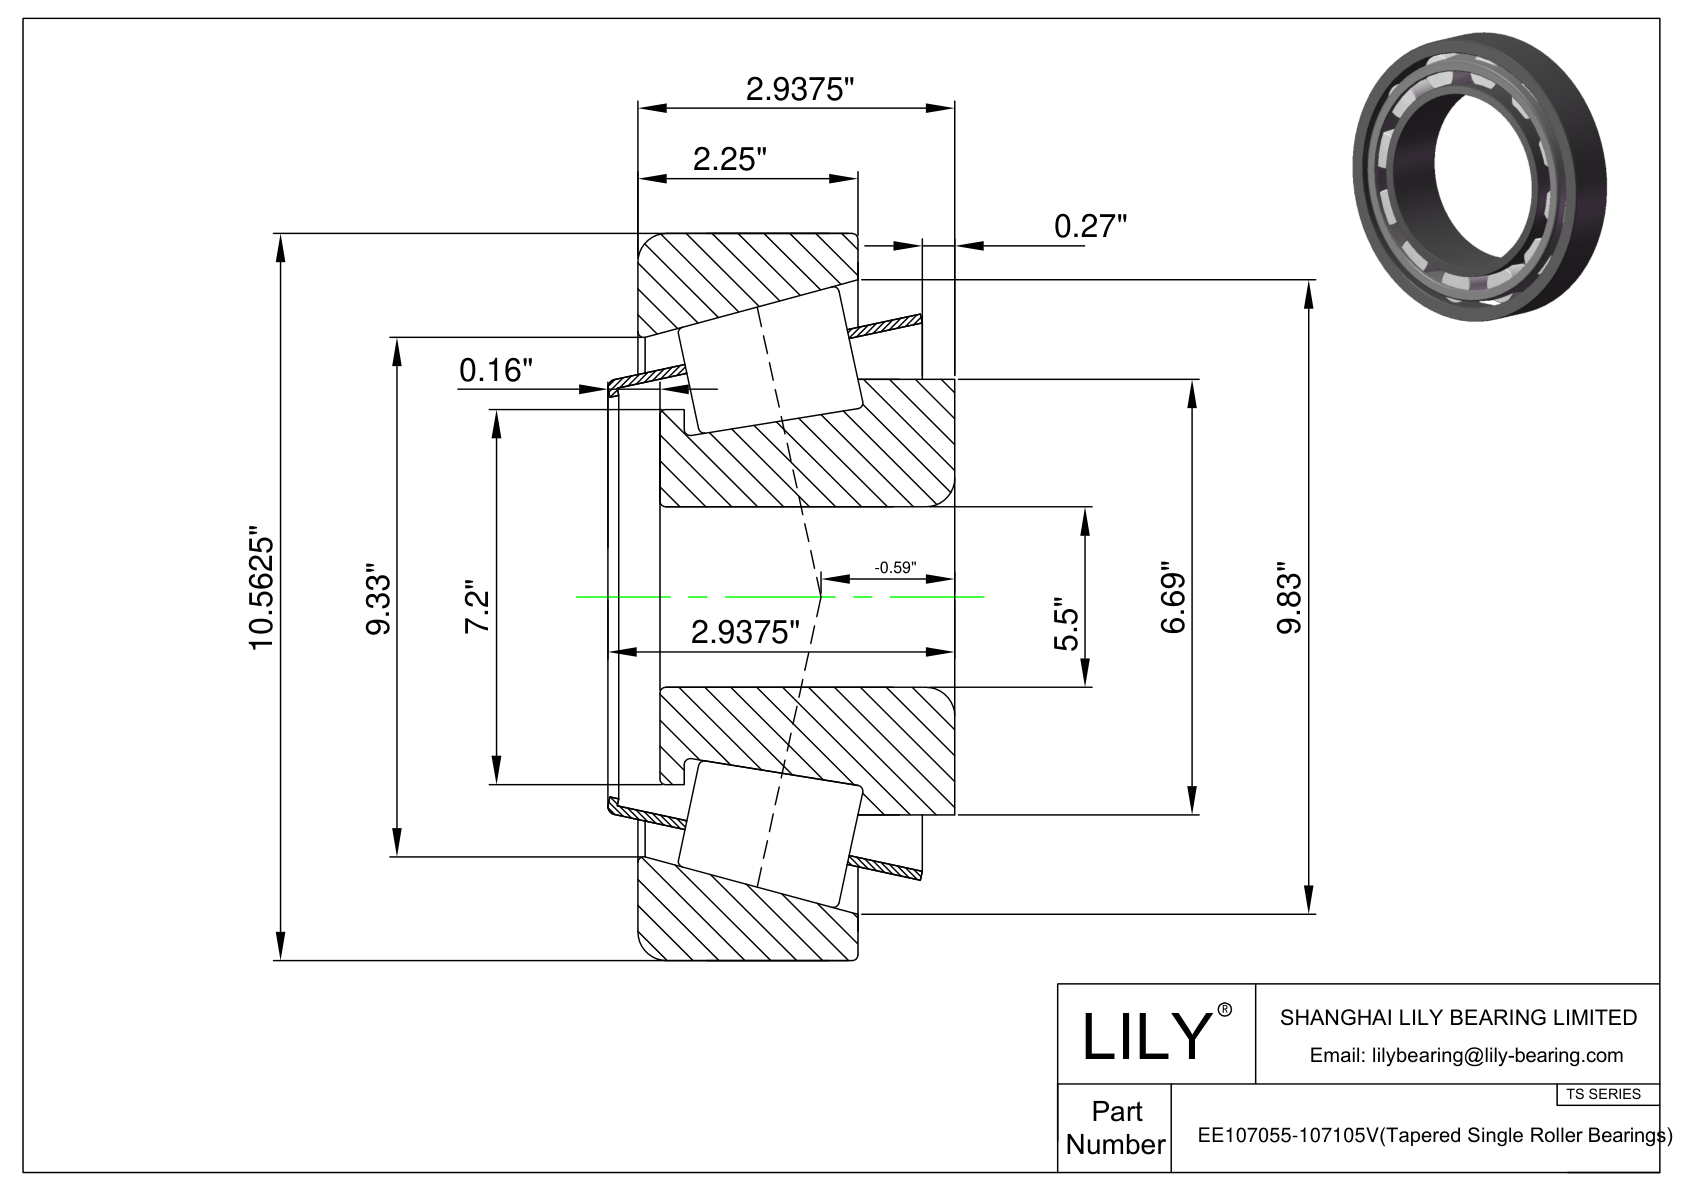 EE107055-107105V TS (Tapered Single Roller Bearings) (Imperial) cad drawing